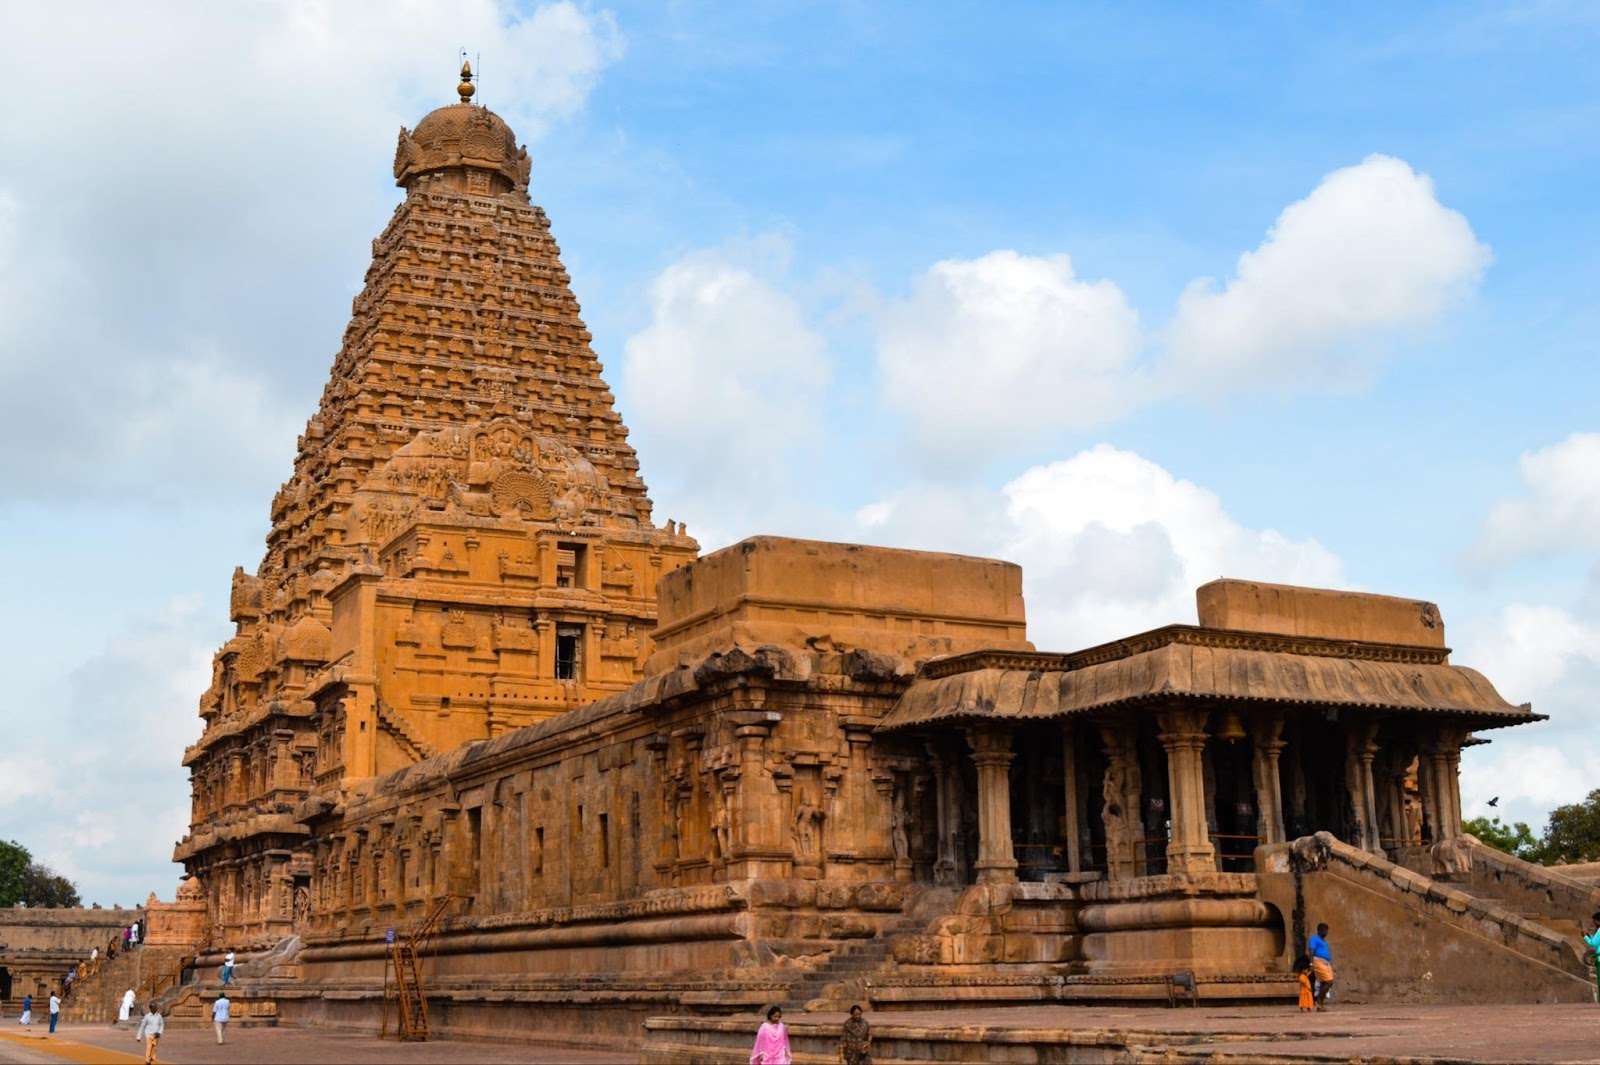 beautiful tourist places in south india